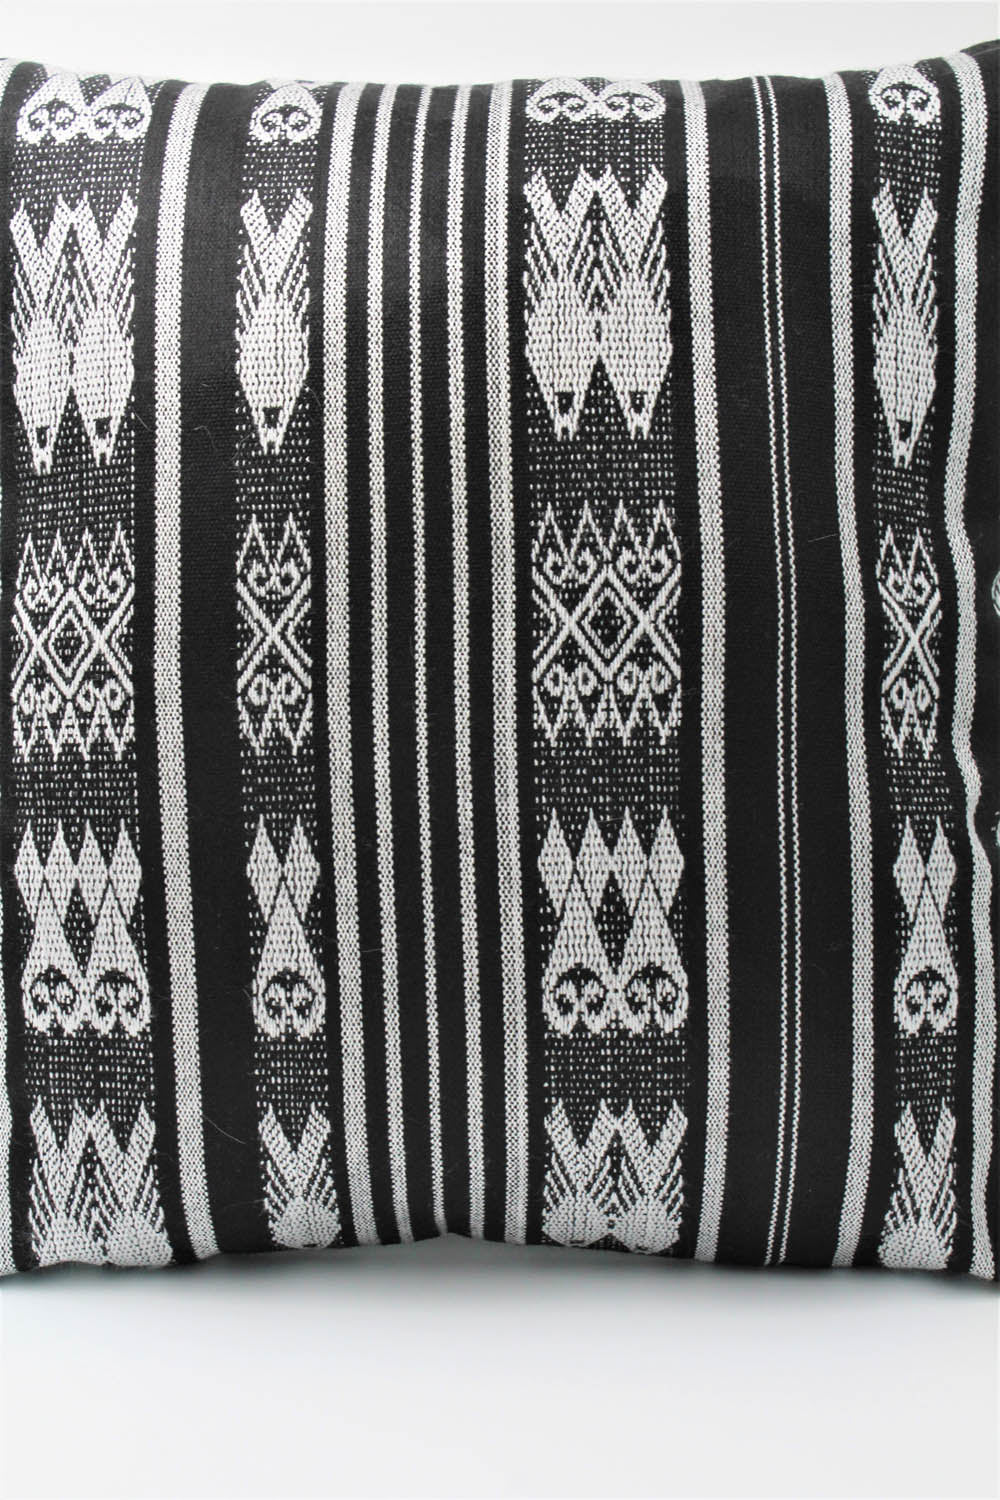 El Mar Pillow Collection: Black and White Fish with Black Tassels 2